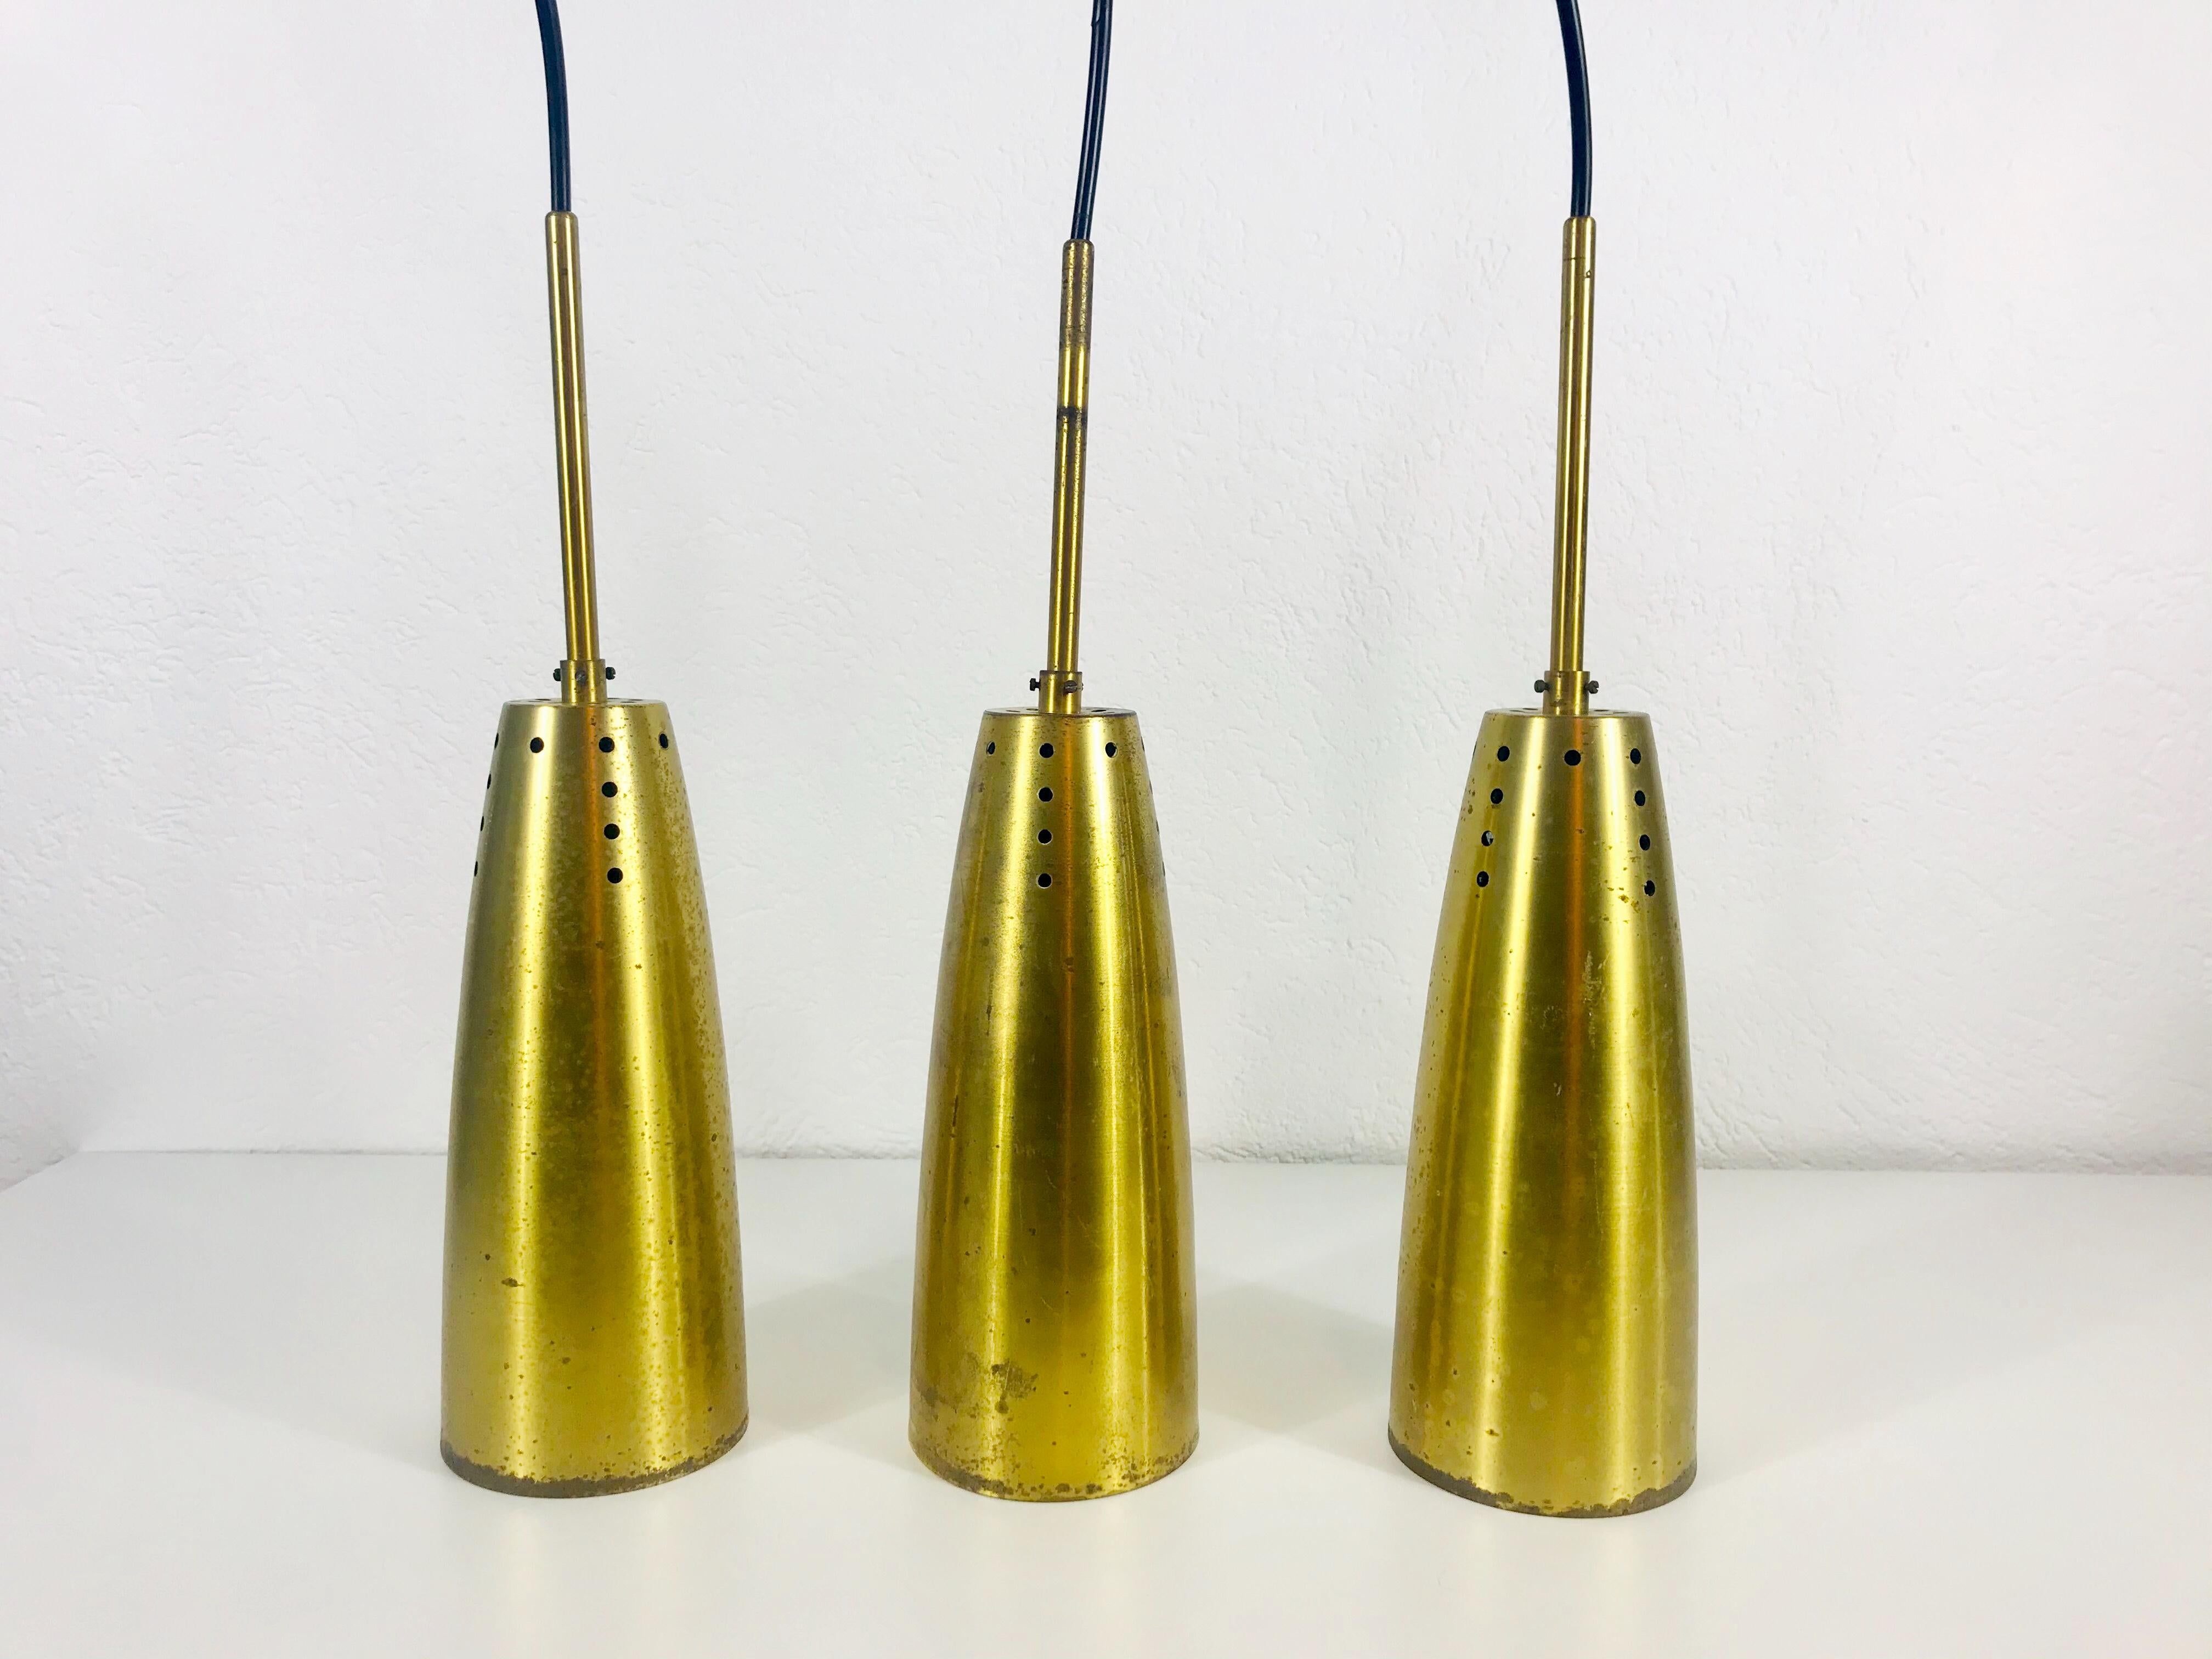 Set of three very rare pendant lamps made in Germany in the 1950s. The lighting is made of brass and has the style of the Italian brand Stilnovo. It has many small holes which are creating beautiful light. The lighting requires one E27 light